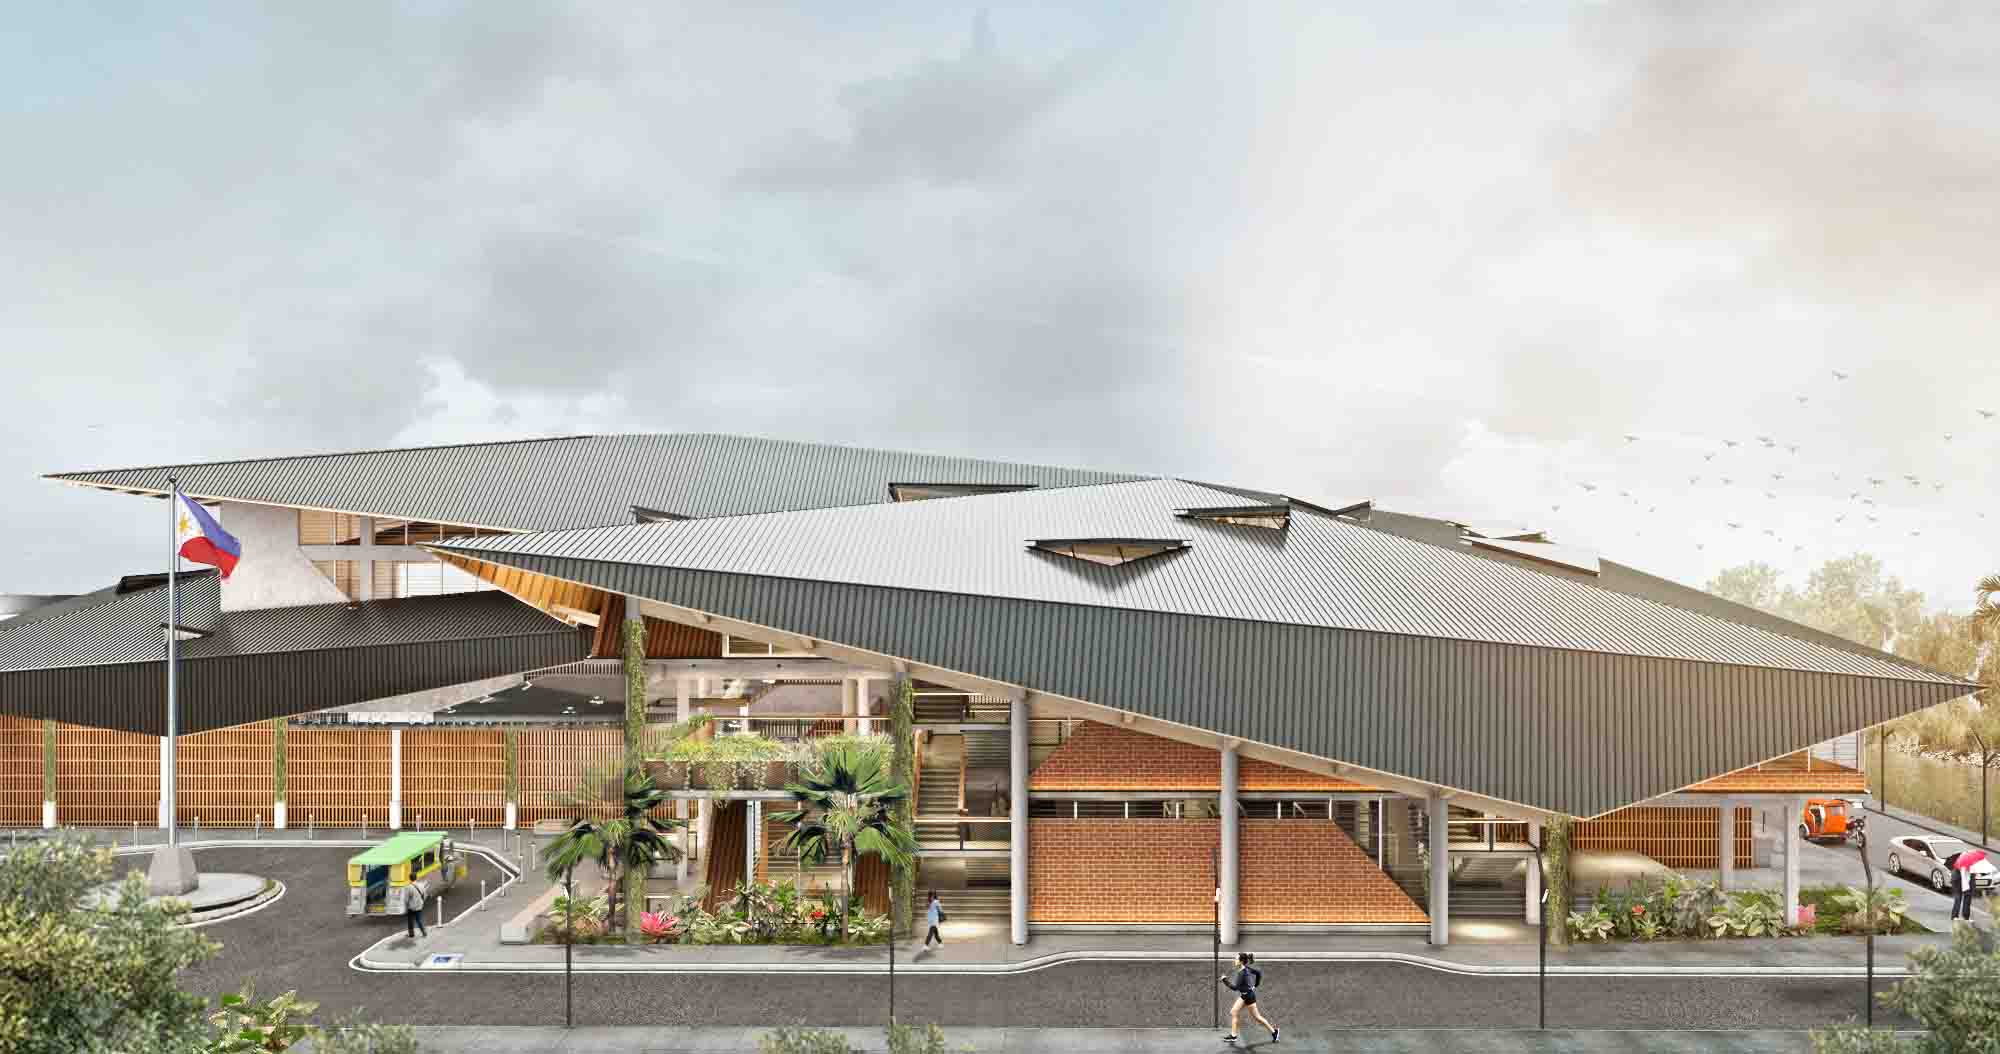 rendering of Baliwag Community Center with slanted roofs and brick facades.